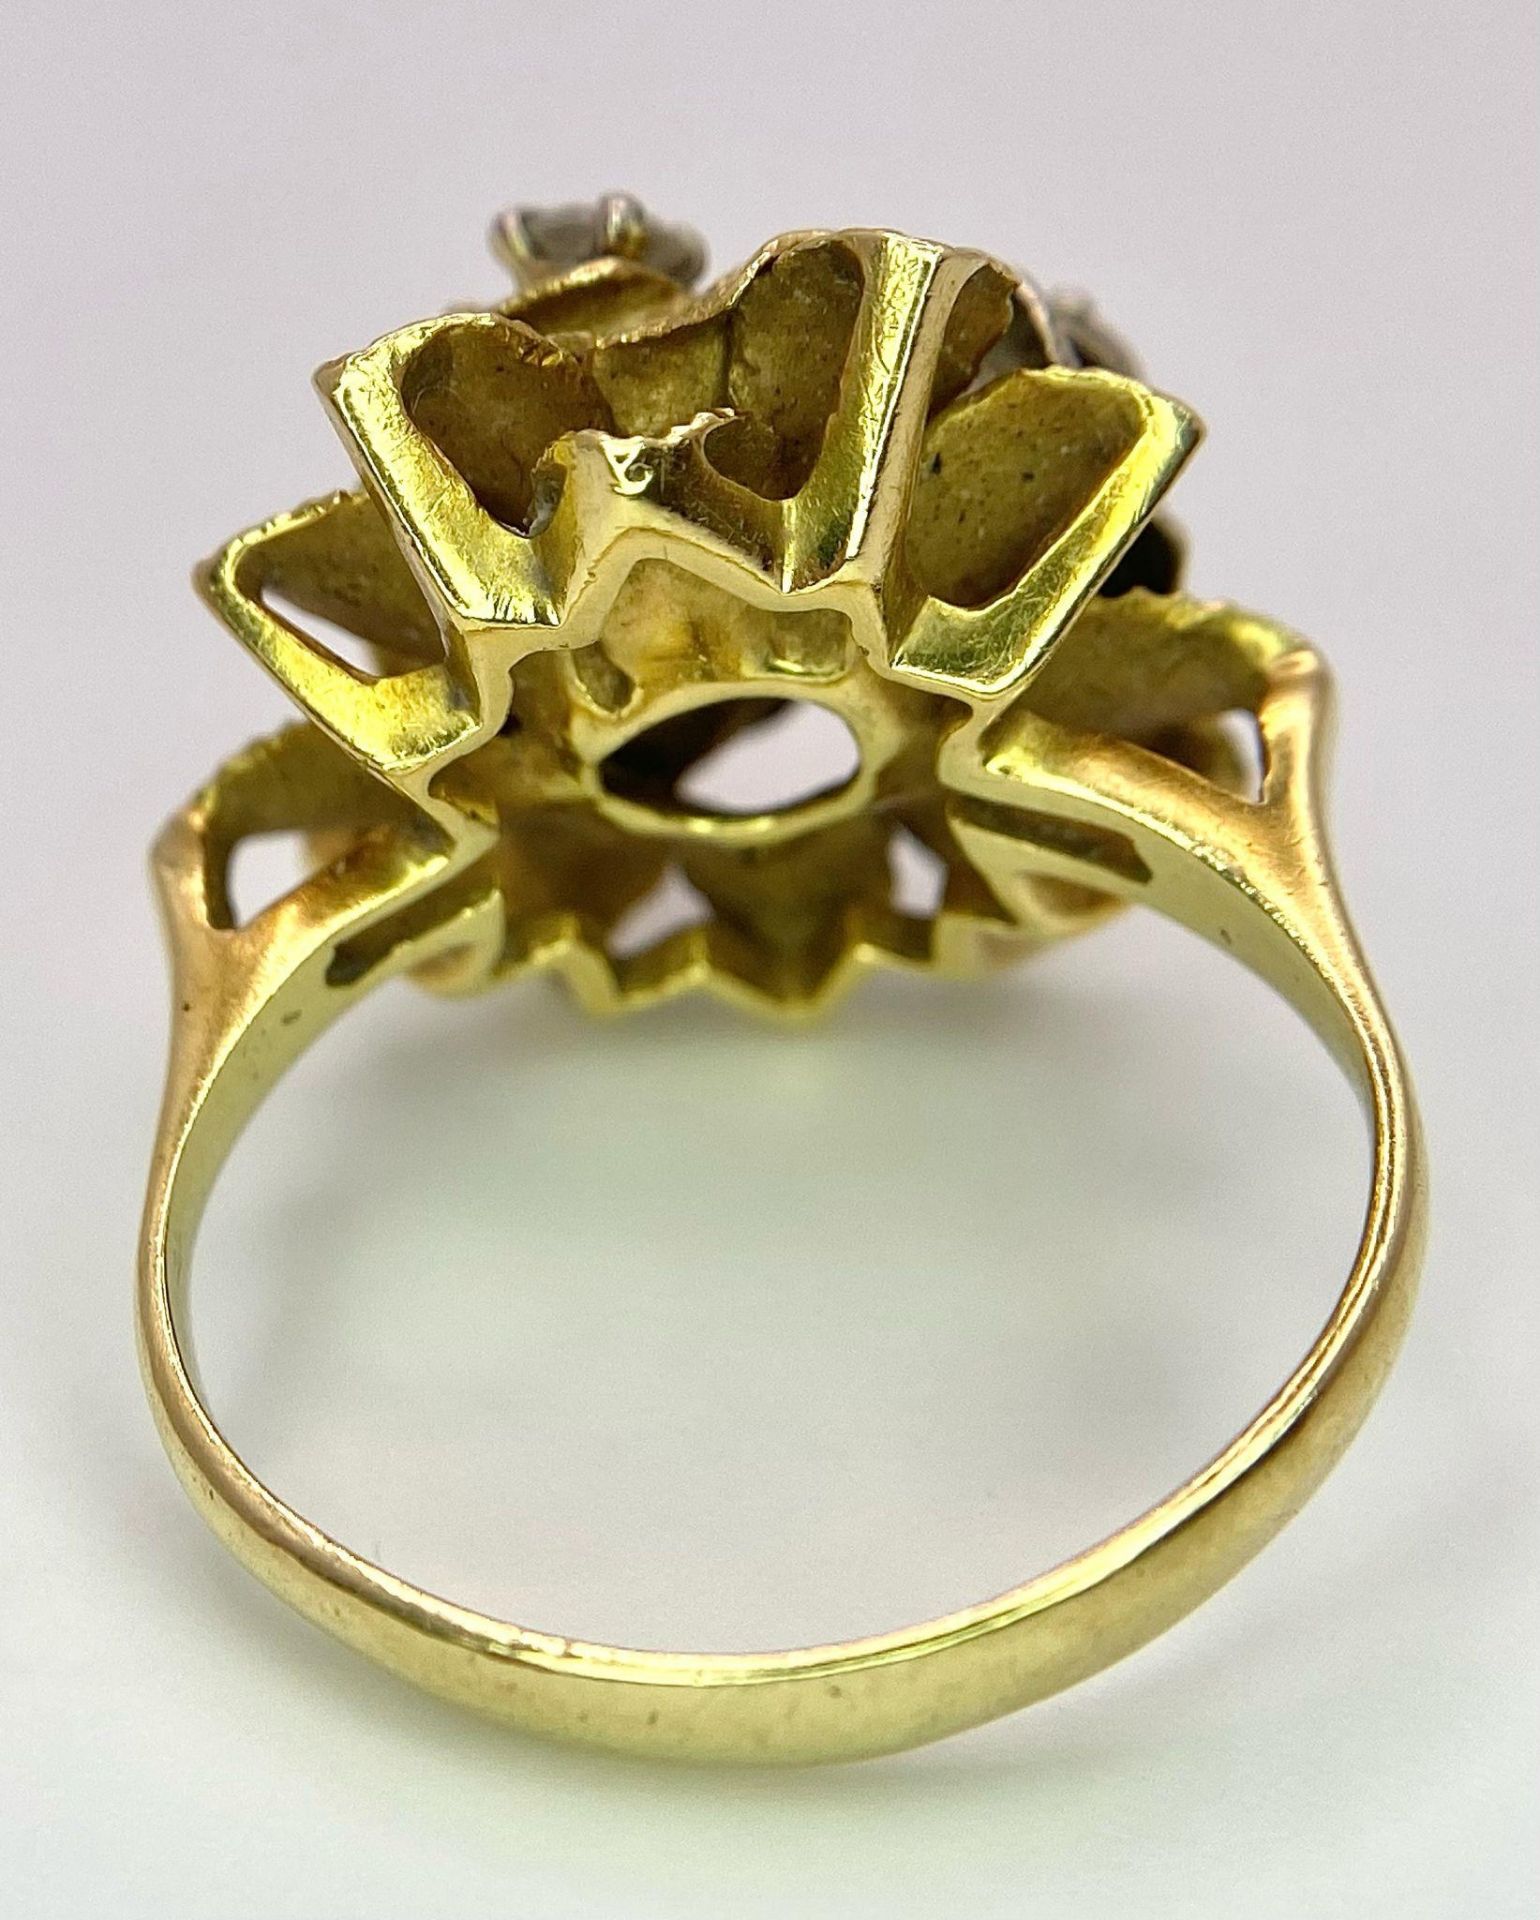 An 18K Yellow Gold and Diamond Floral Design Ring. A rich cluster of golden petals give sanctuary to - Image 8 of 10